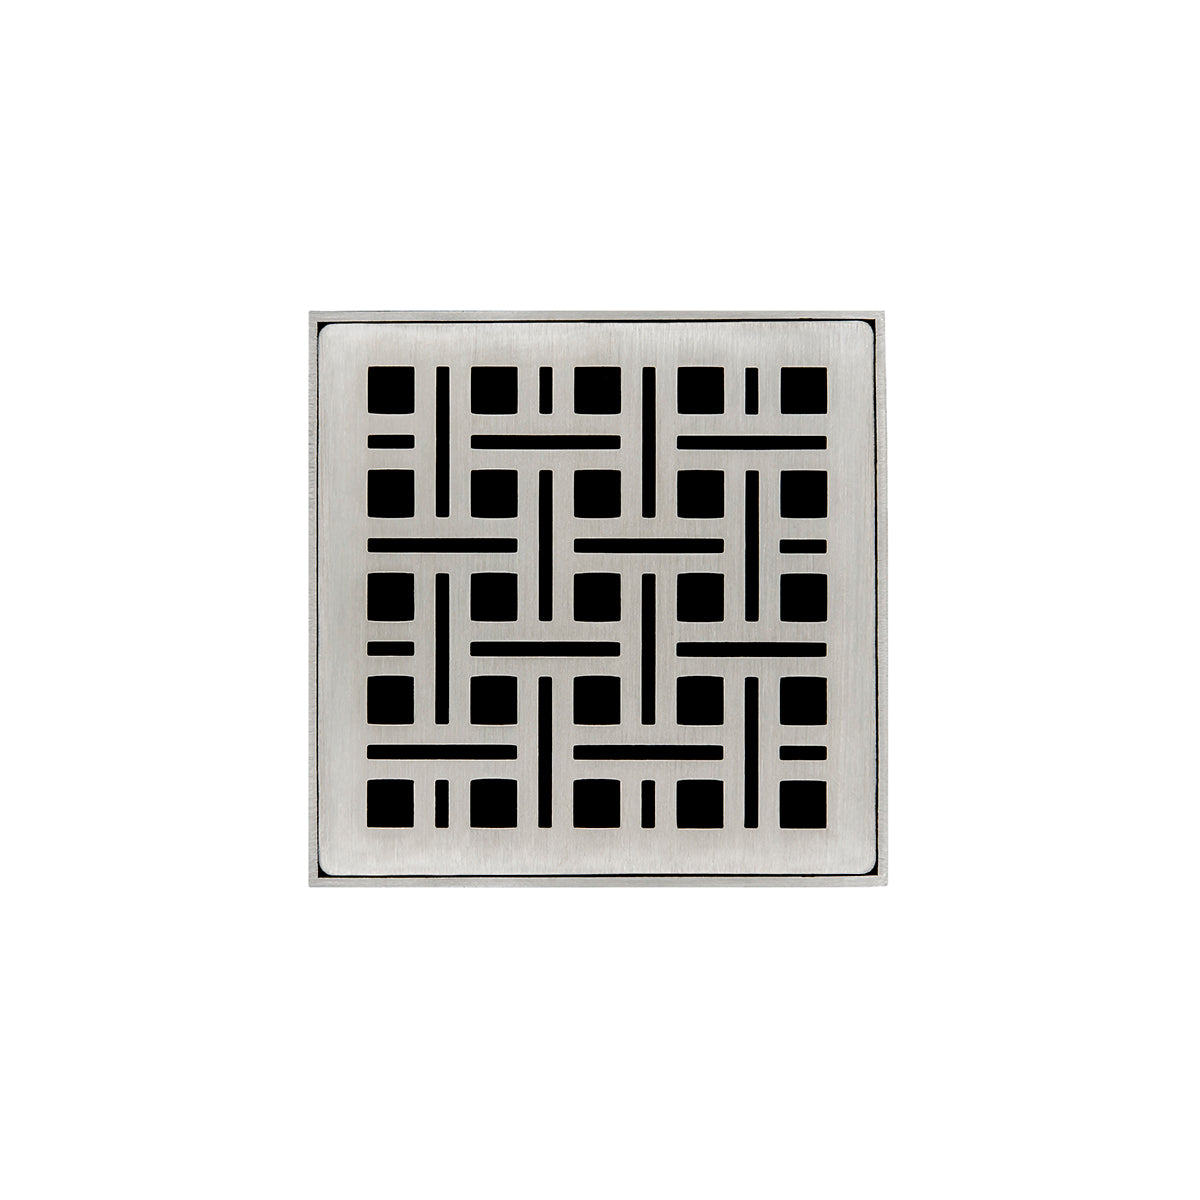 Infinity Drain 4" x 4" VDB 4 Premium Center Drain Kit with Weave Pattern Decorative Plate with Stainless Steel Bonded Flange Drain Body, 2" No Hub Outlet